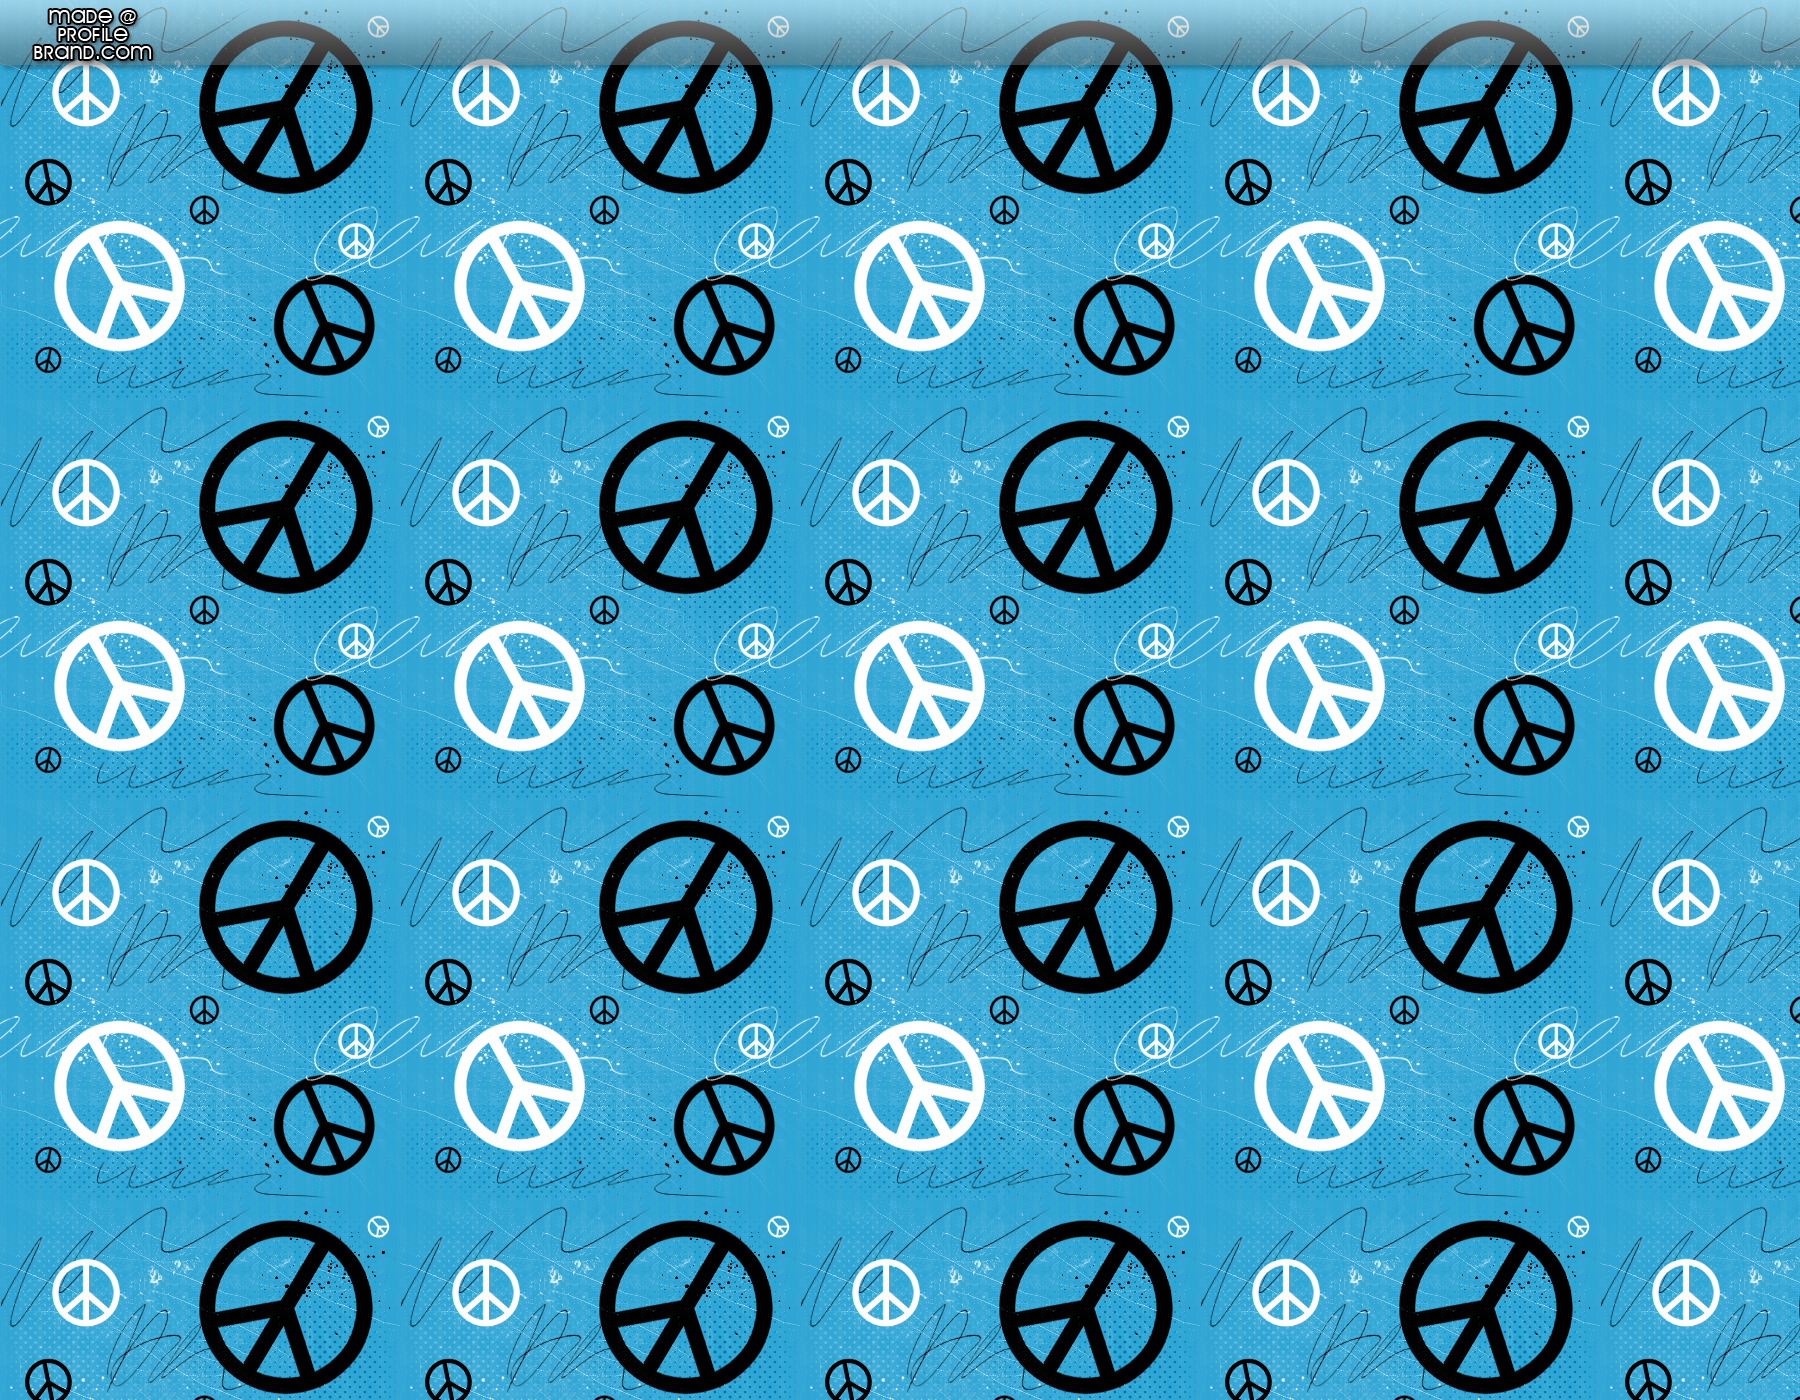 Content Mycutegraphics Background Peace Sign Bg7 Gif